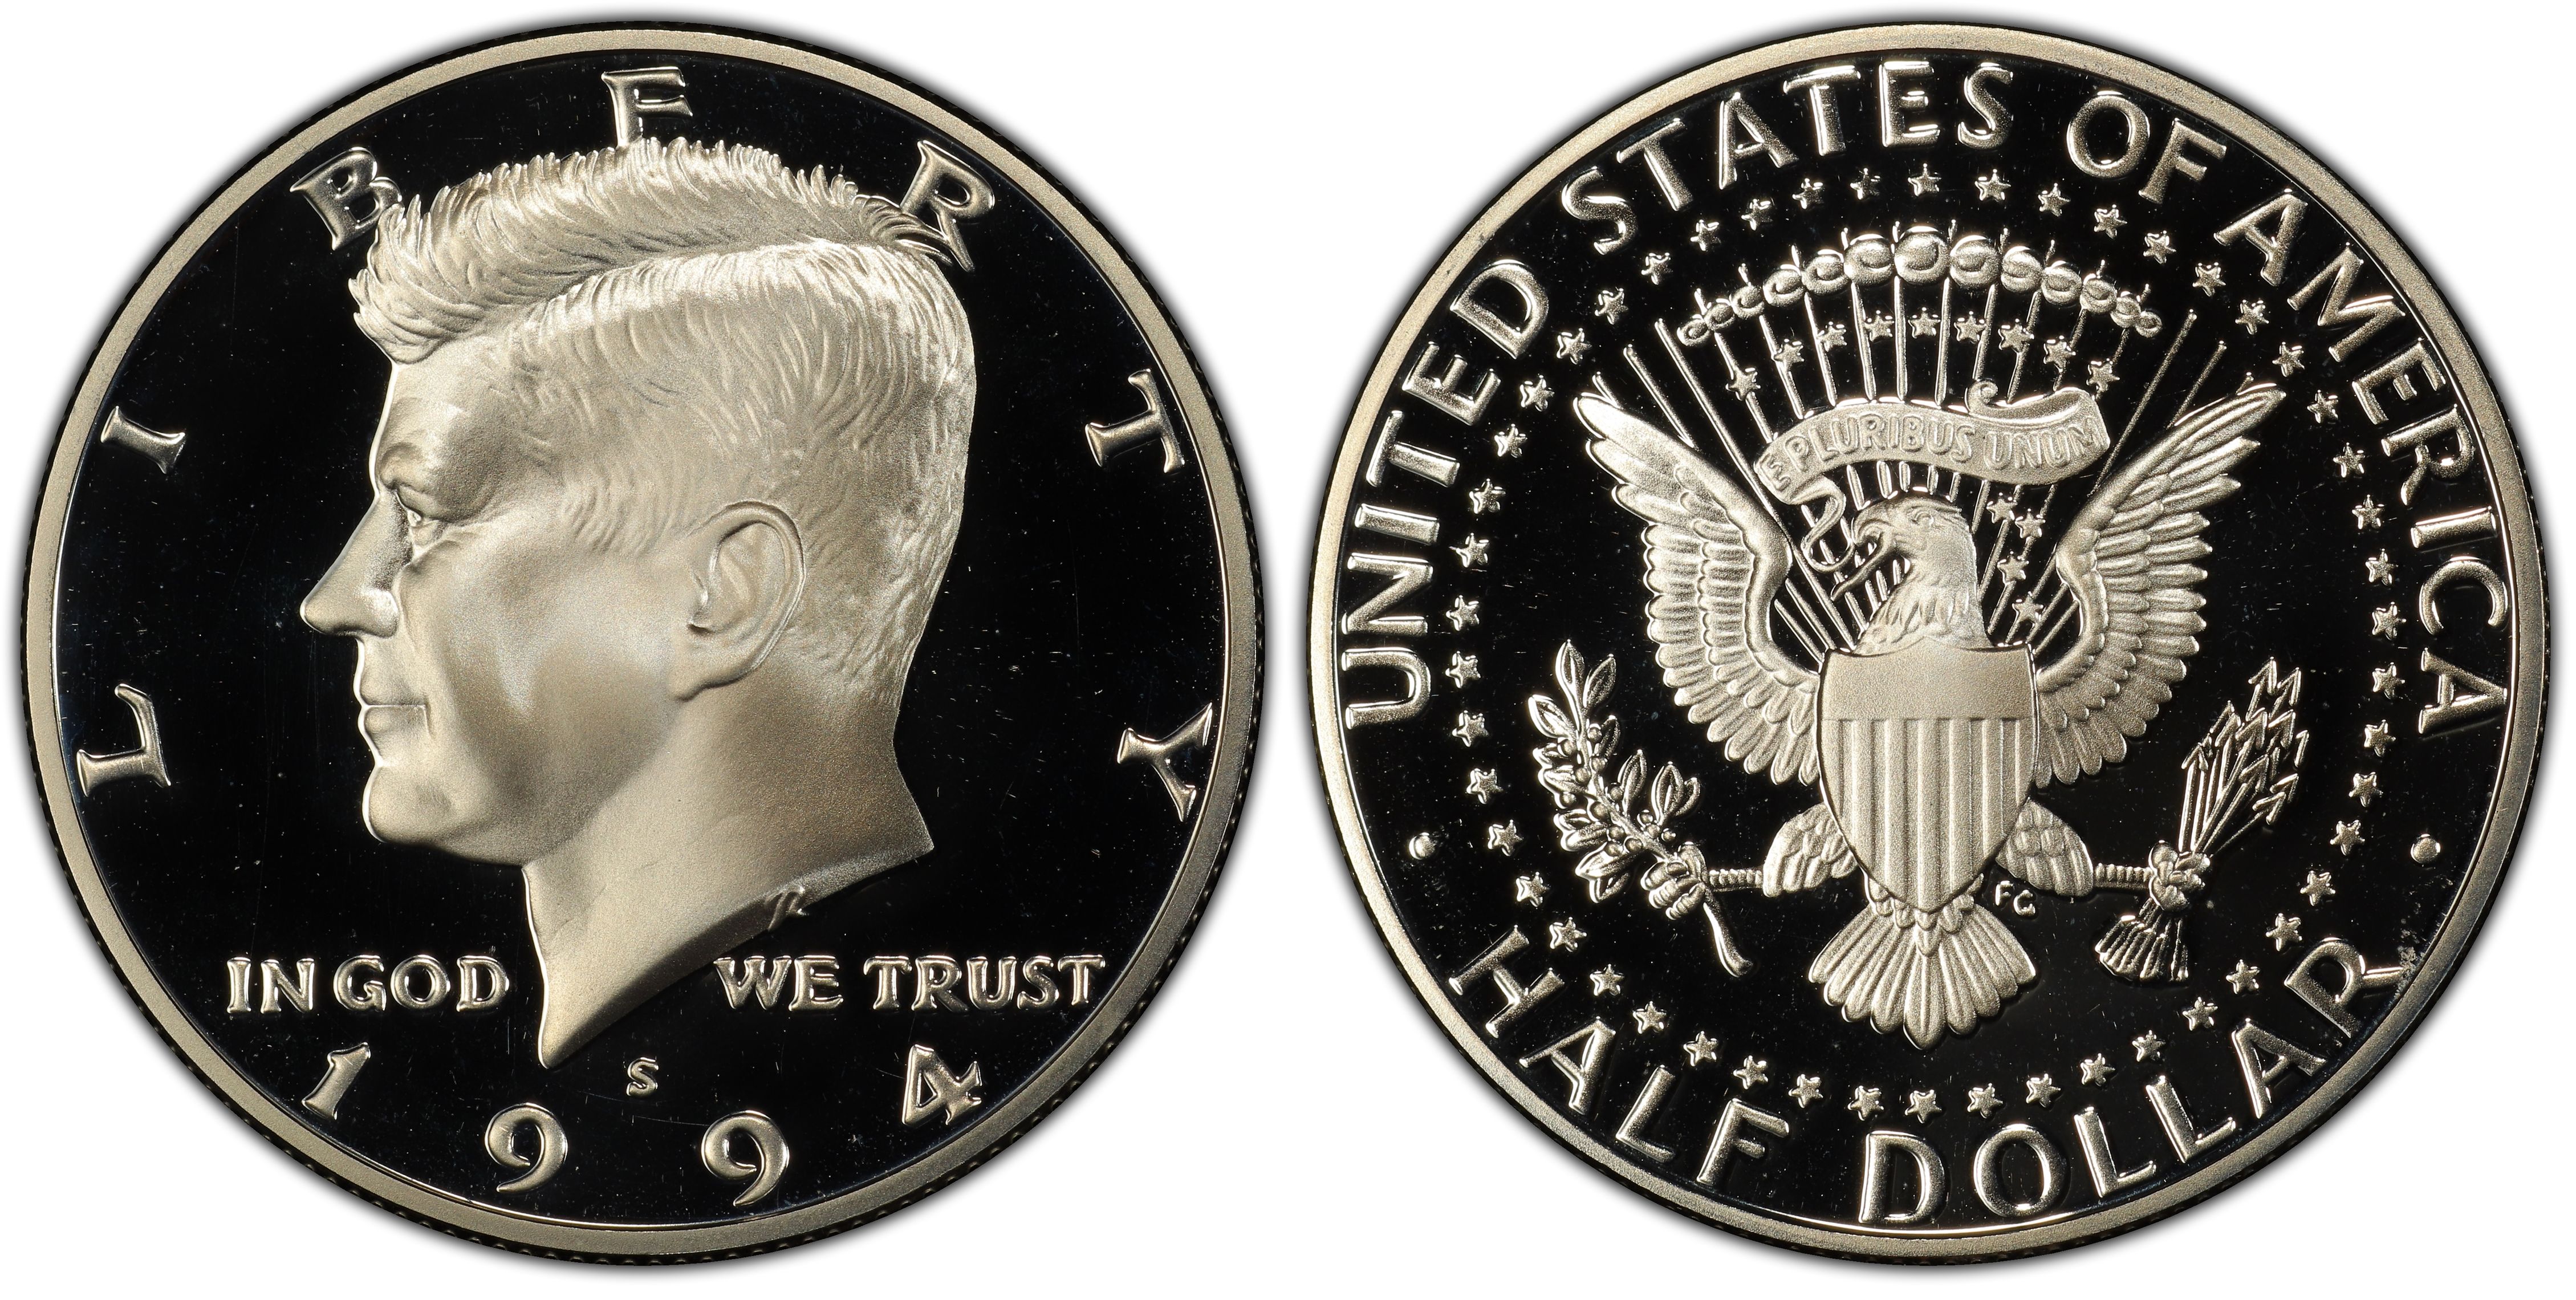 1998 P+D BRILLIANT UNCIRCULATED KENNEDY HALF DOLLARS IN MINT SEALED CELLOPHANE